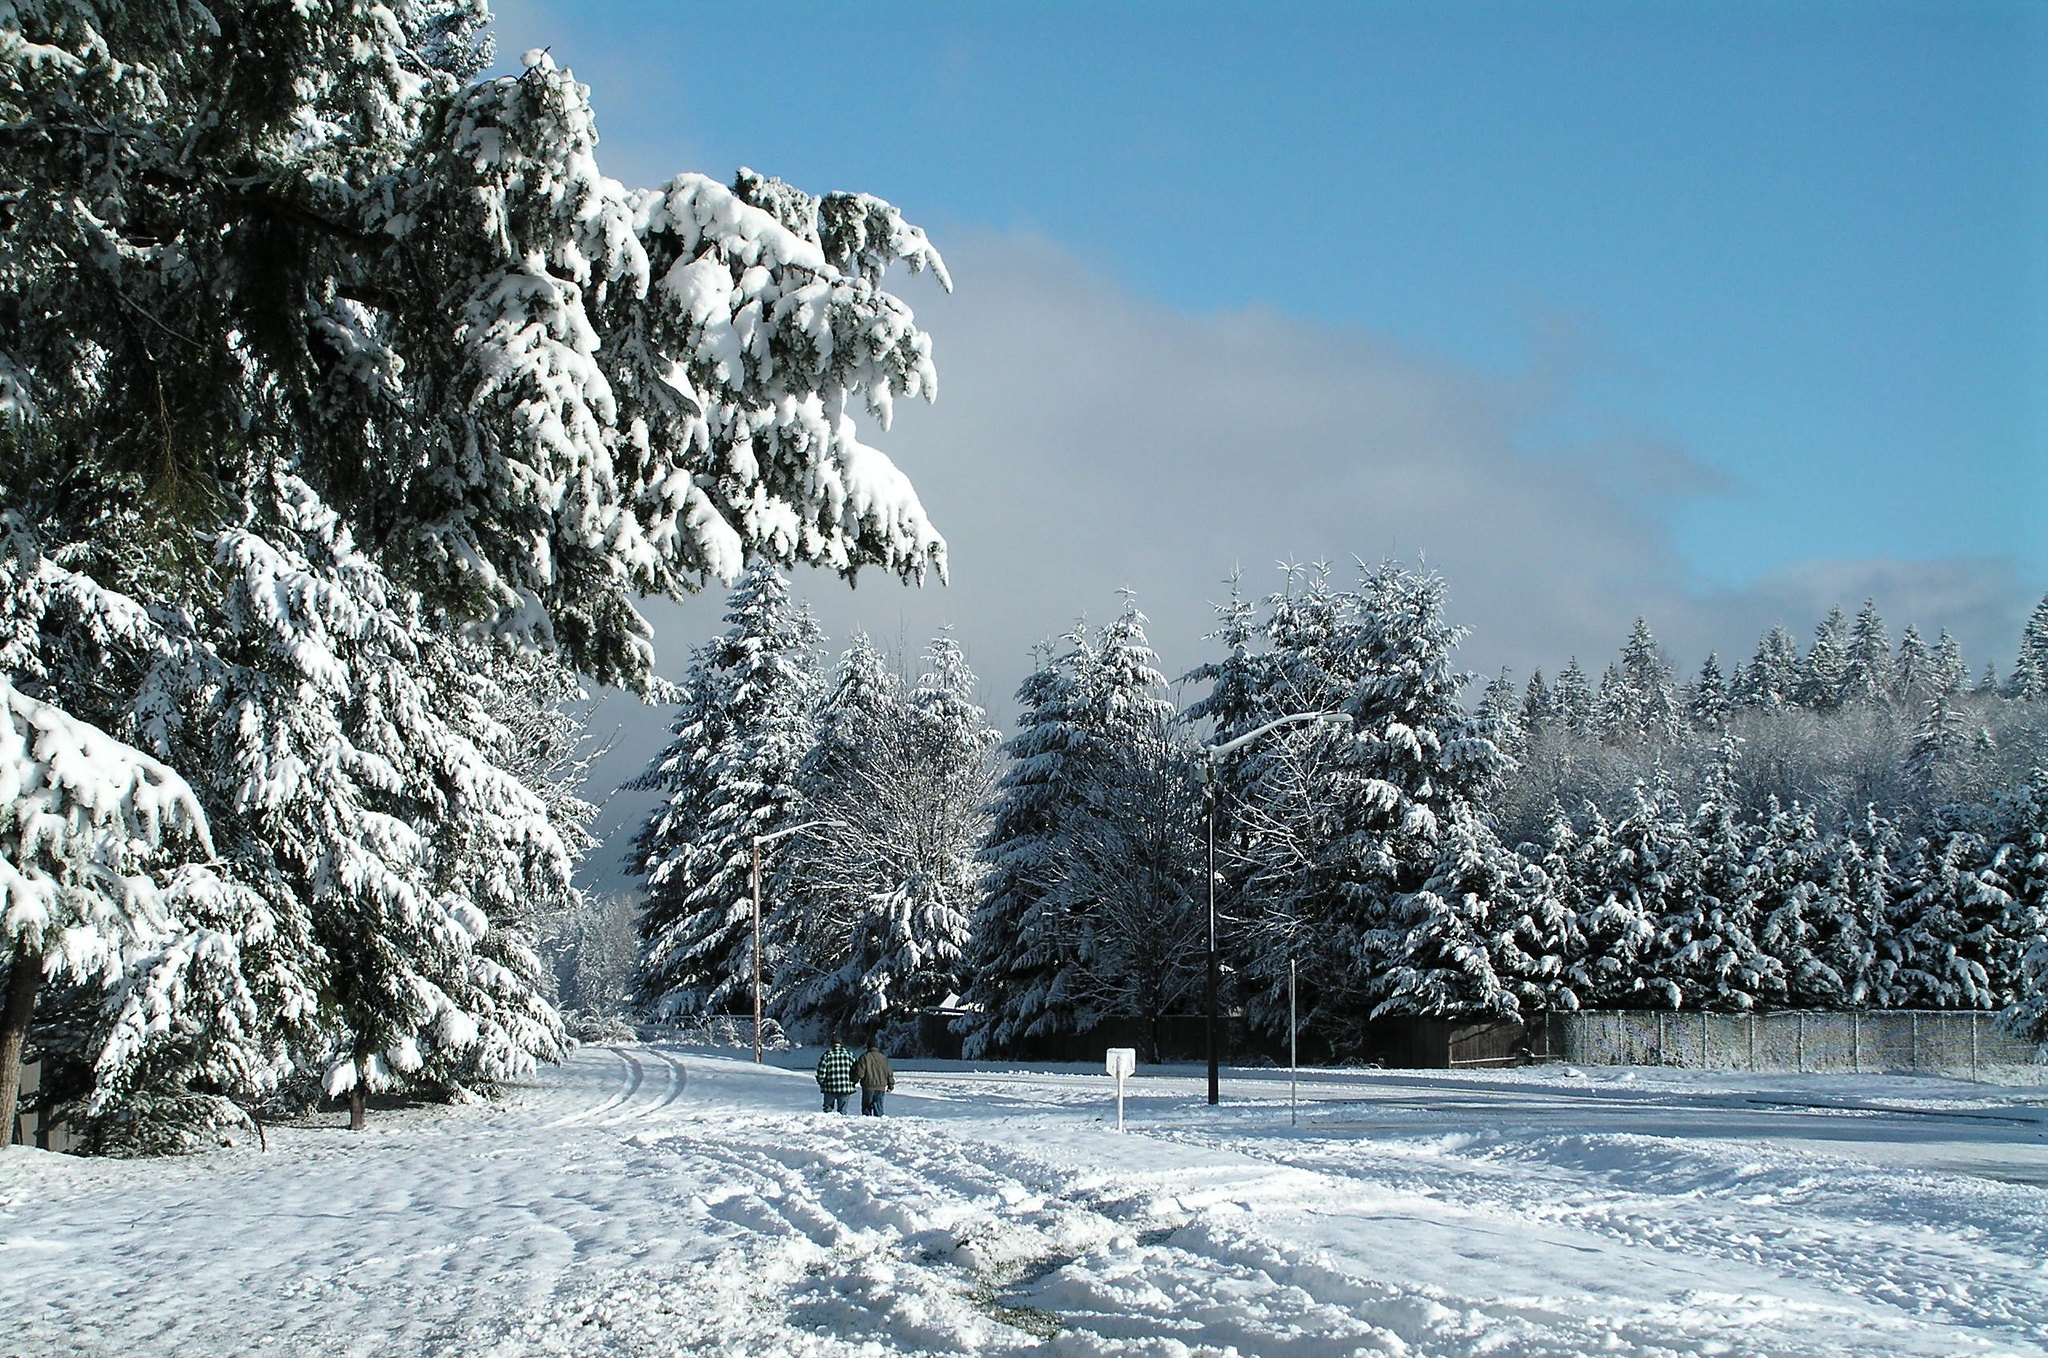 Snowy landscape in Covington, WA with snow covered trees and two people walking on a snow covered path.